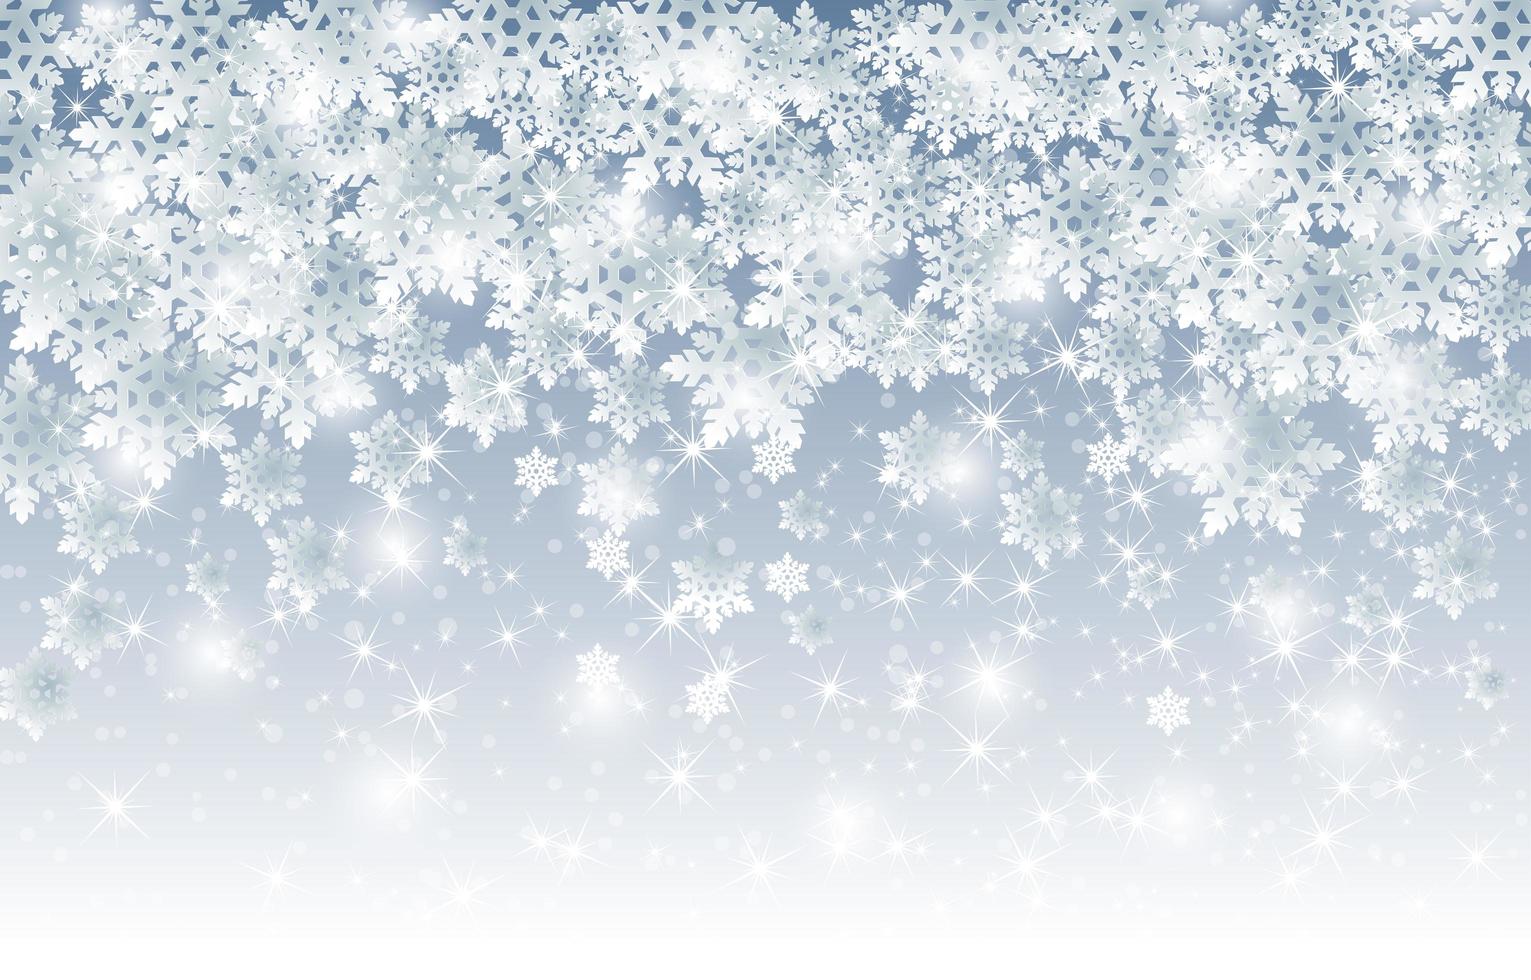 Abstract Winter Snowflakes Background vector